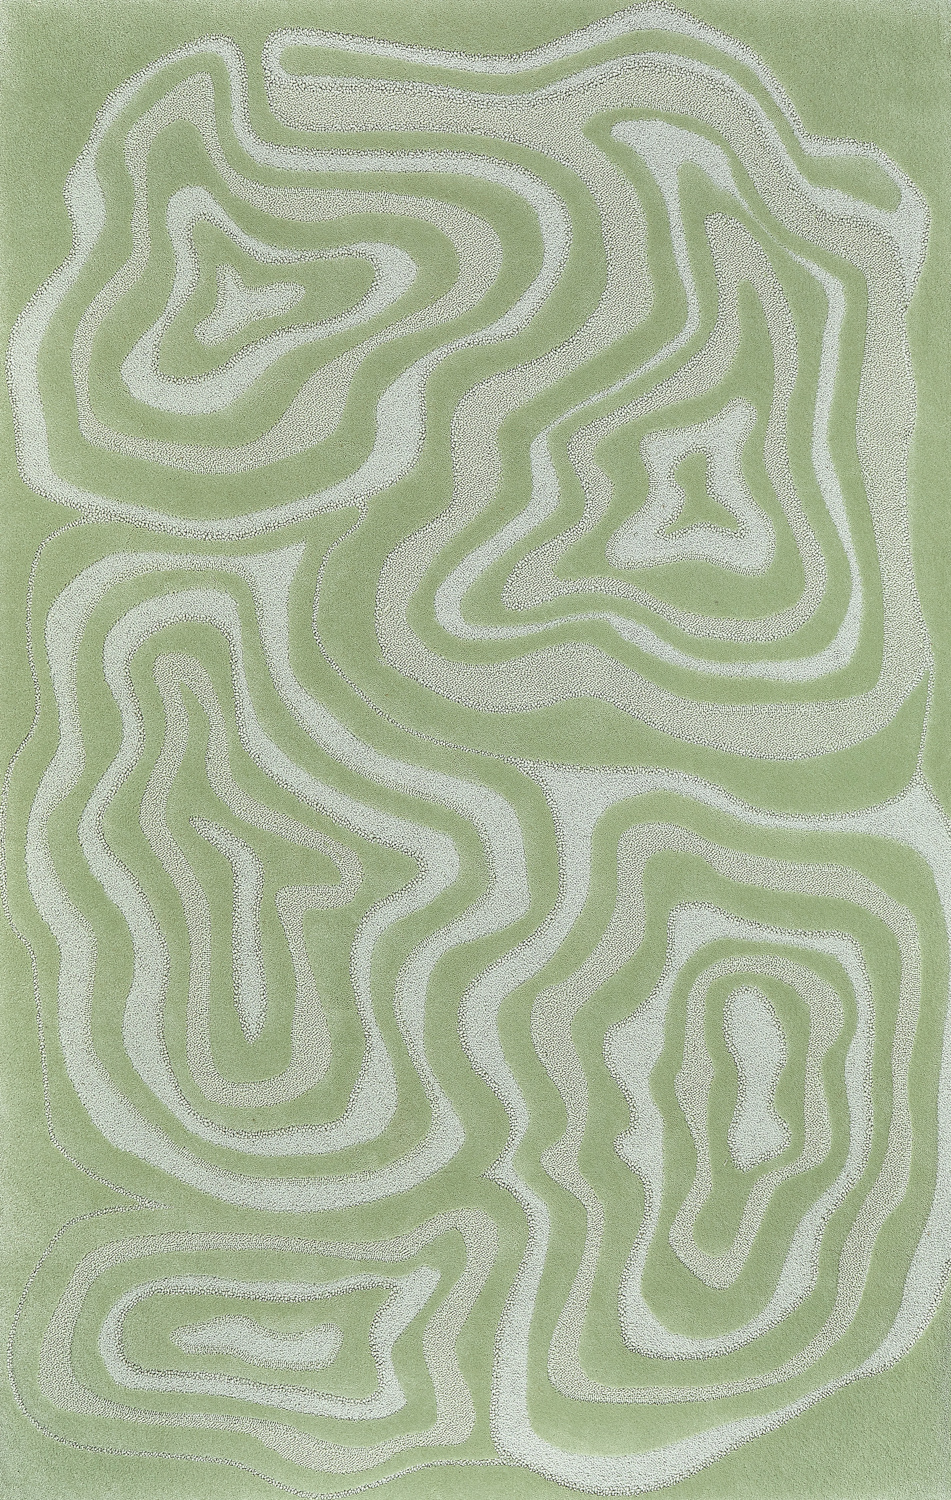 large green swirled rug, which is part of Merida Rugs' collection